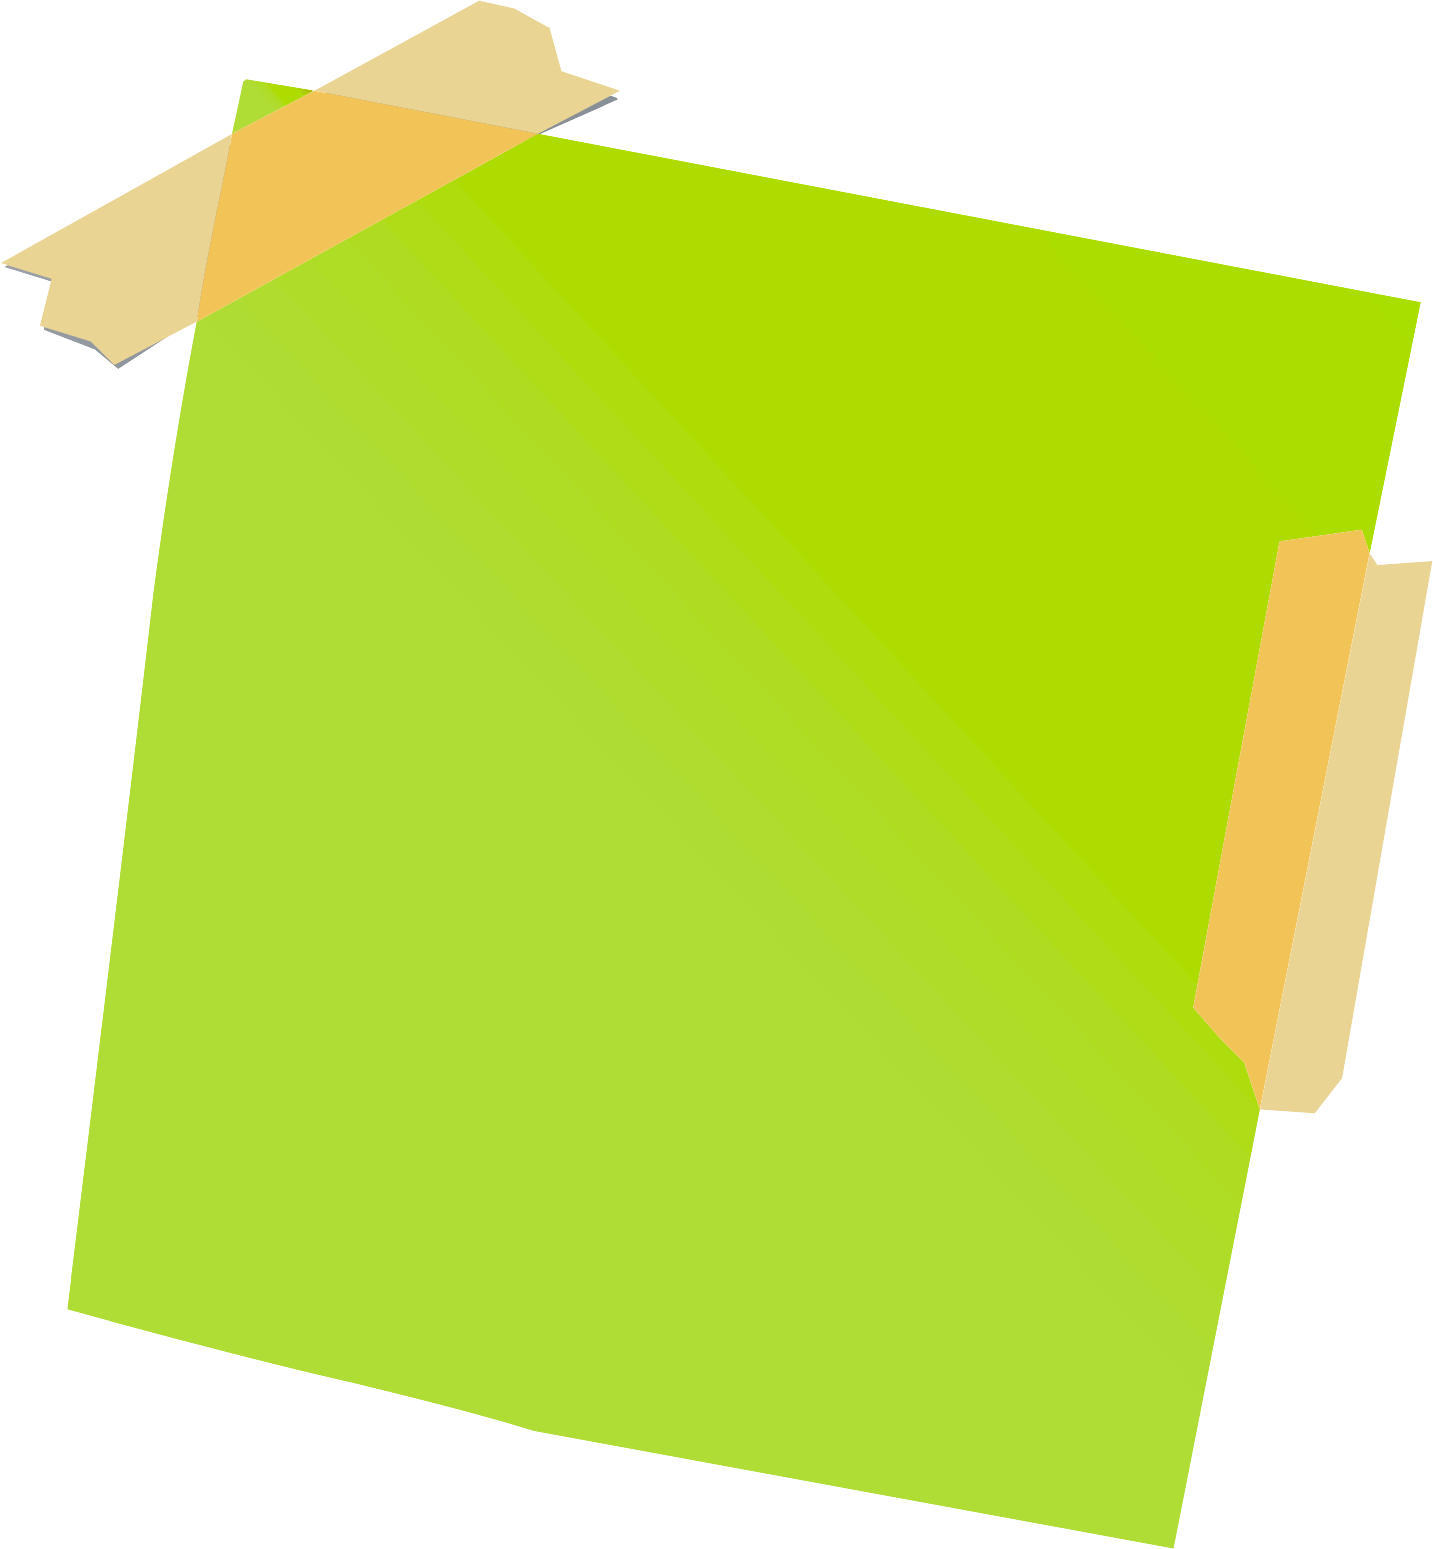 Green clipart sticky note, Green sticky note Transparent